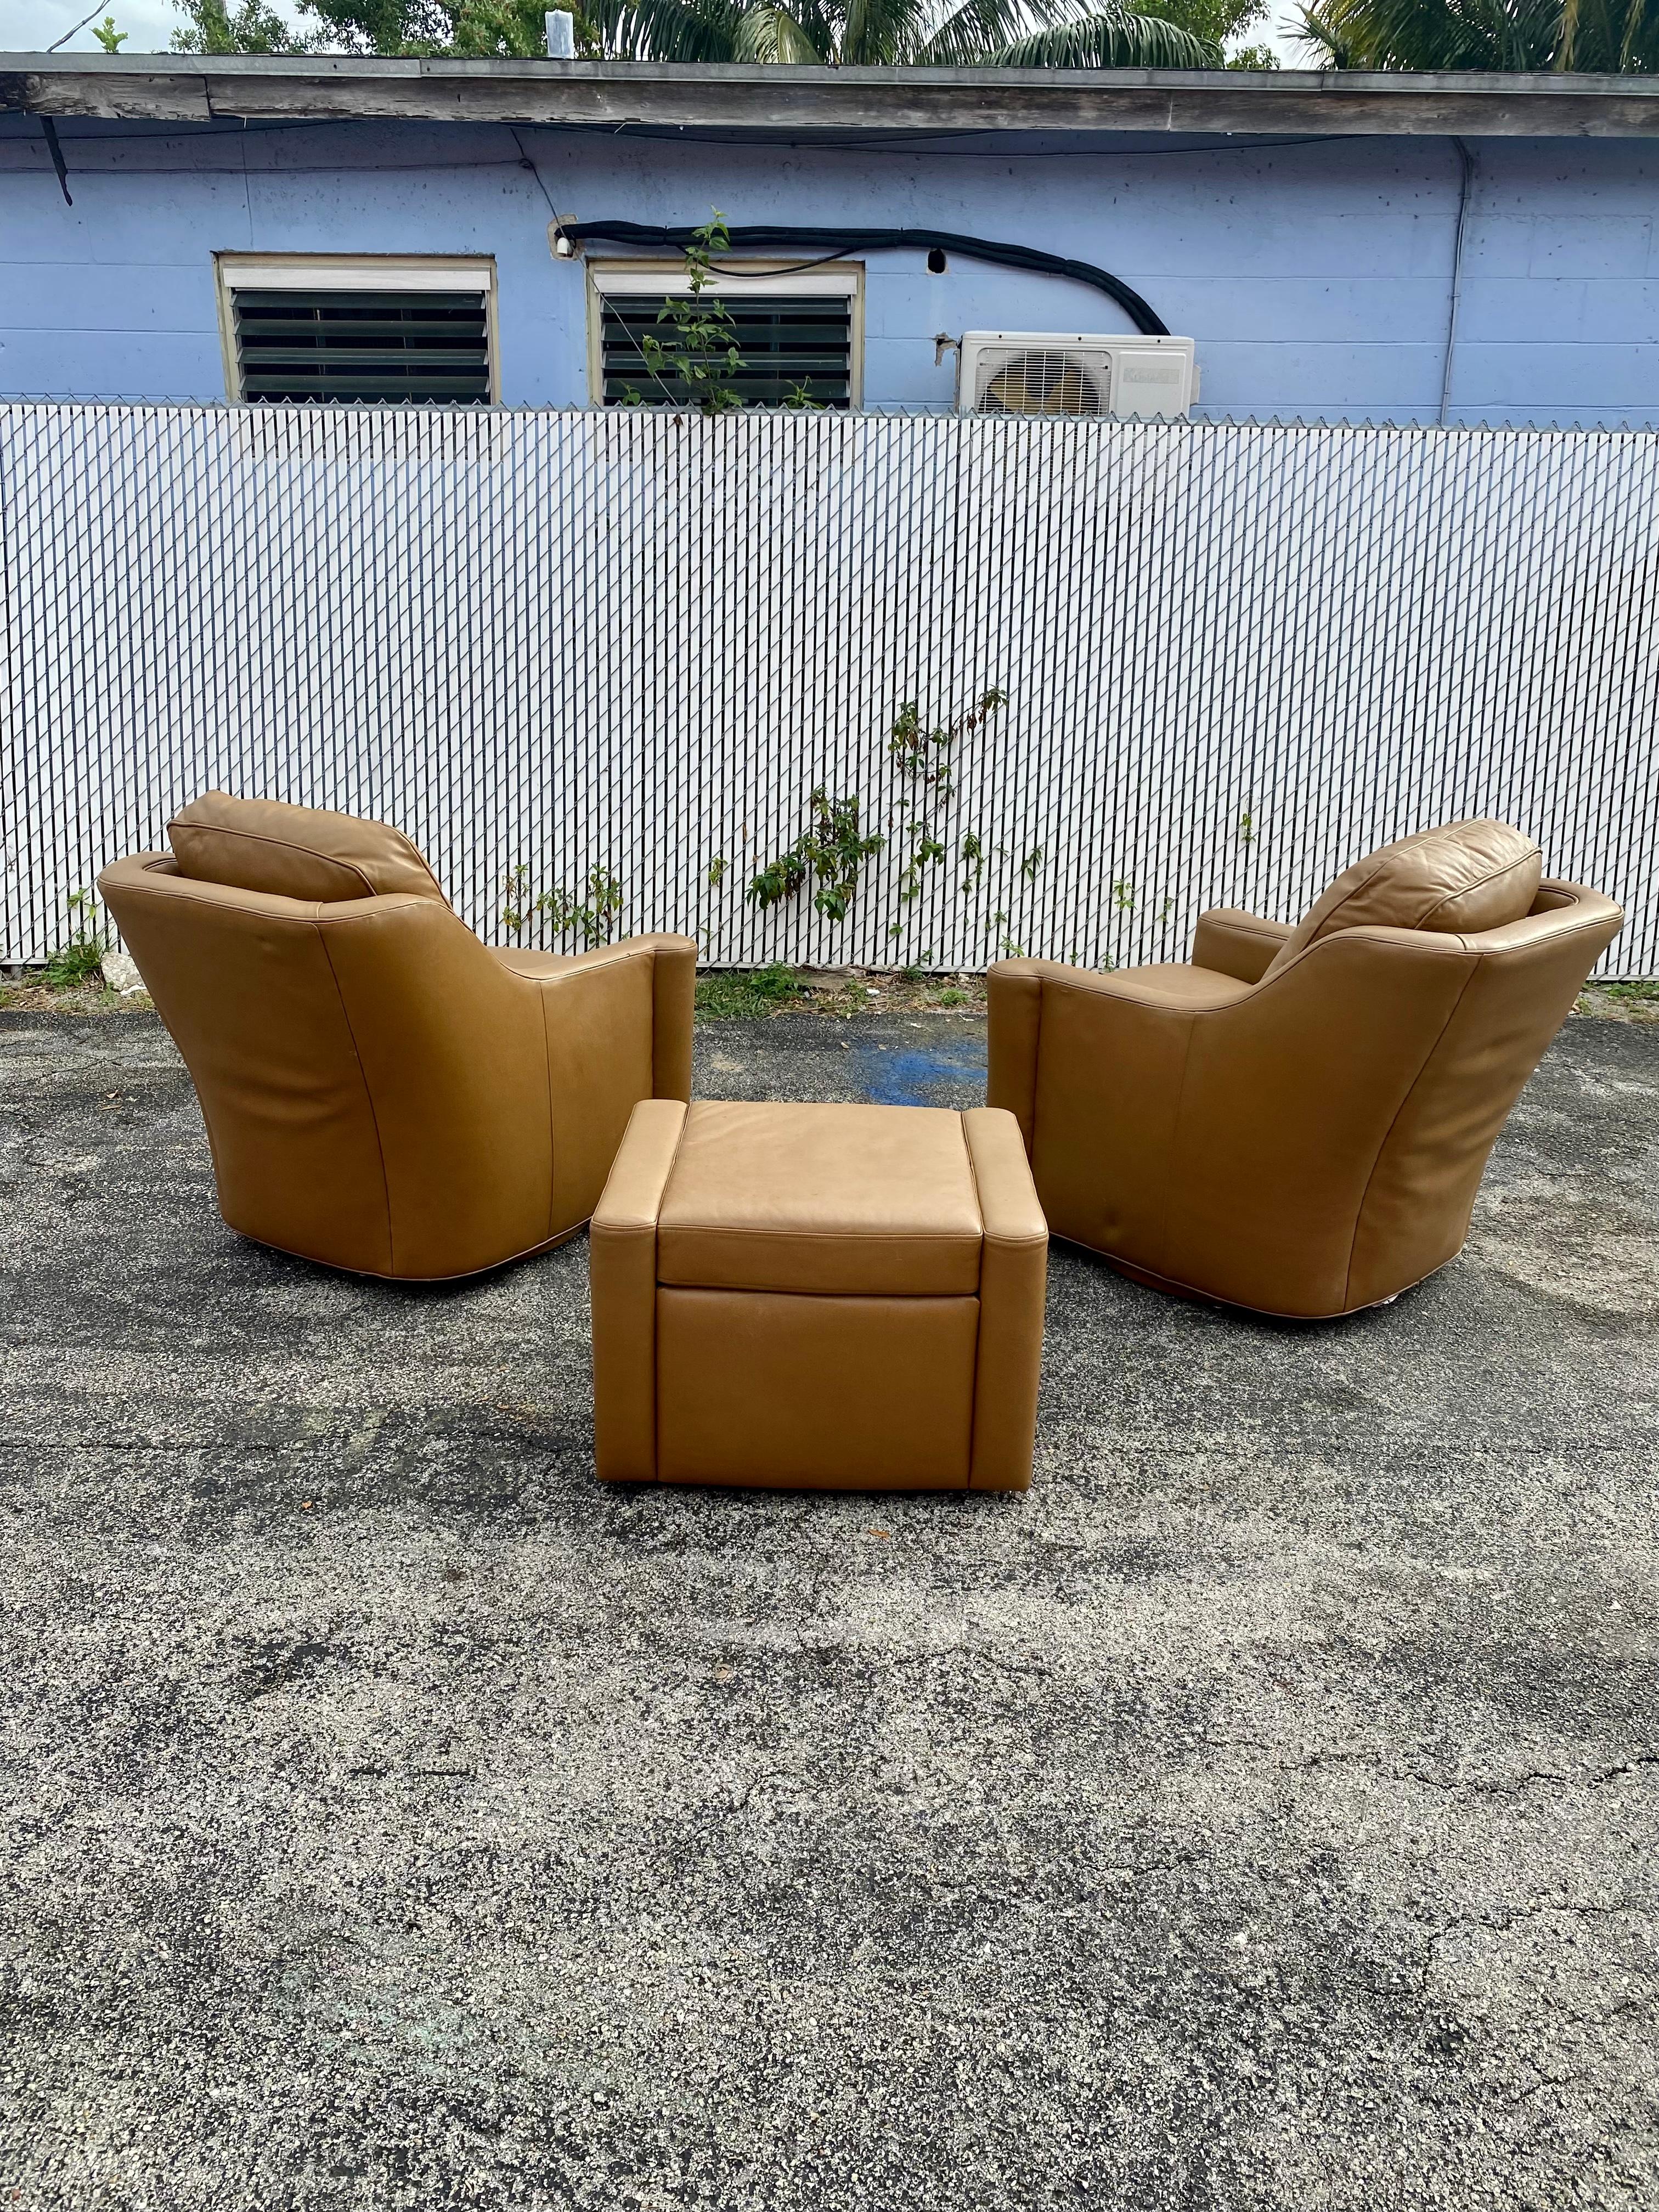 1990s Hancock & Moore Leather Swivel Chairs and Ottoman, Set of 3 In Good Condition For Sale In Fort Lauderdale, FL